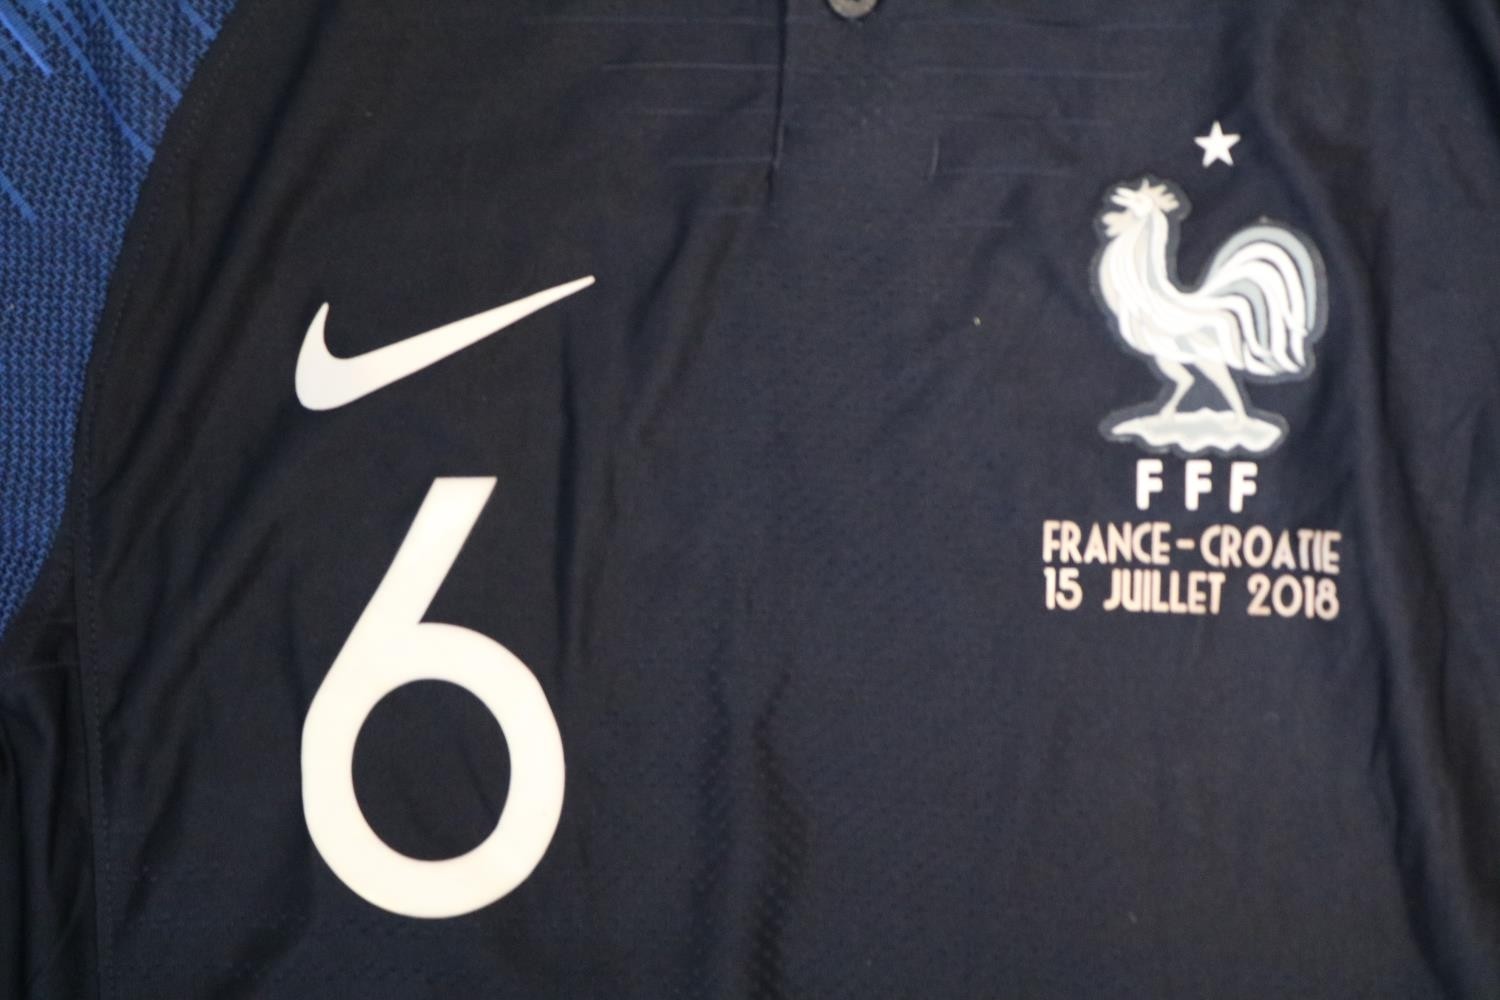 PAUL POGBA 2018 FIFA WORLD CUP FINAL MATCH ISSUED FRANCE JERSEY The 2018 FIFA World Cup final was - Image 4 of 5